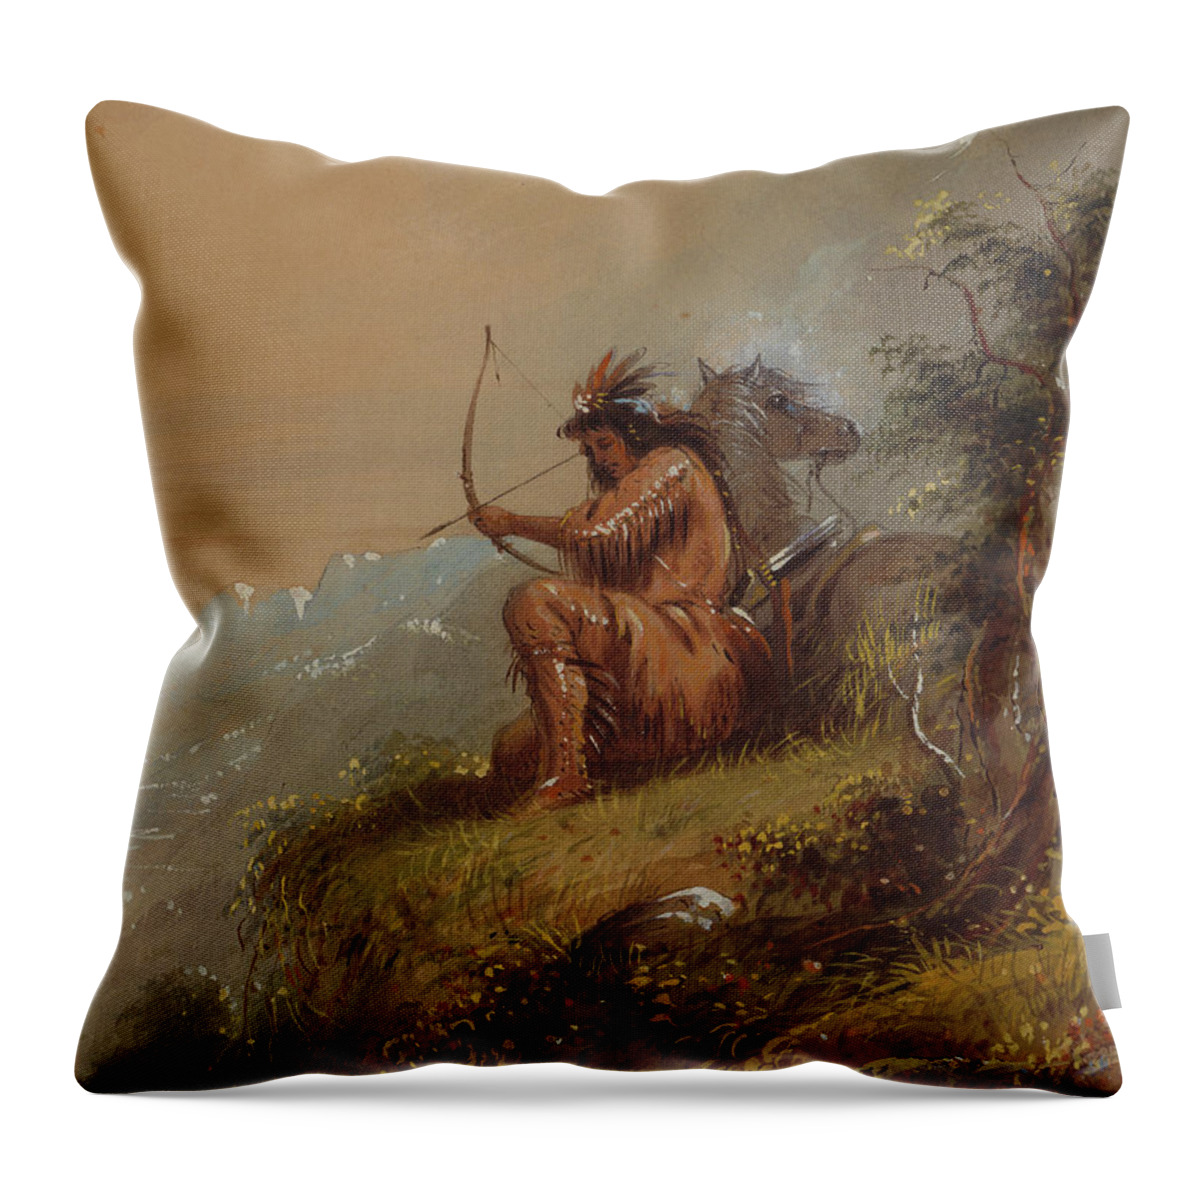 19th Century Throw Pillow featuring the painting Pawnee Supplying Camp, C.1837 by Alfred Jacob Miller